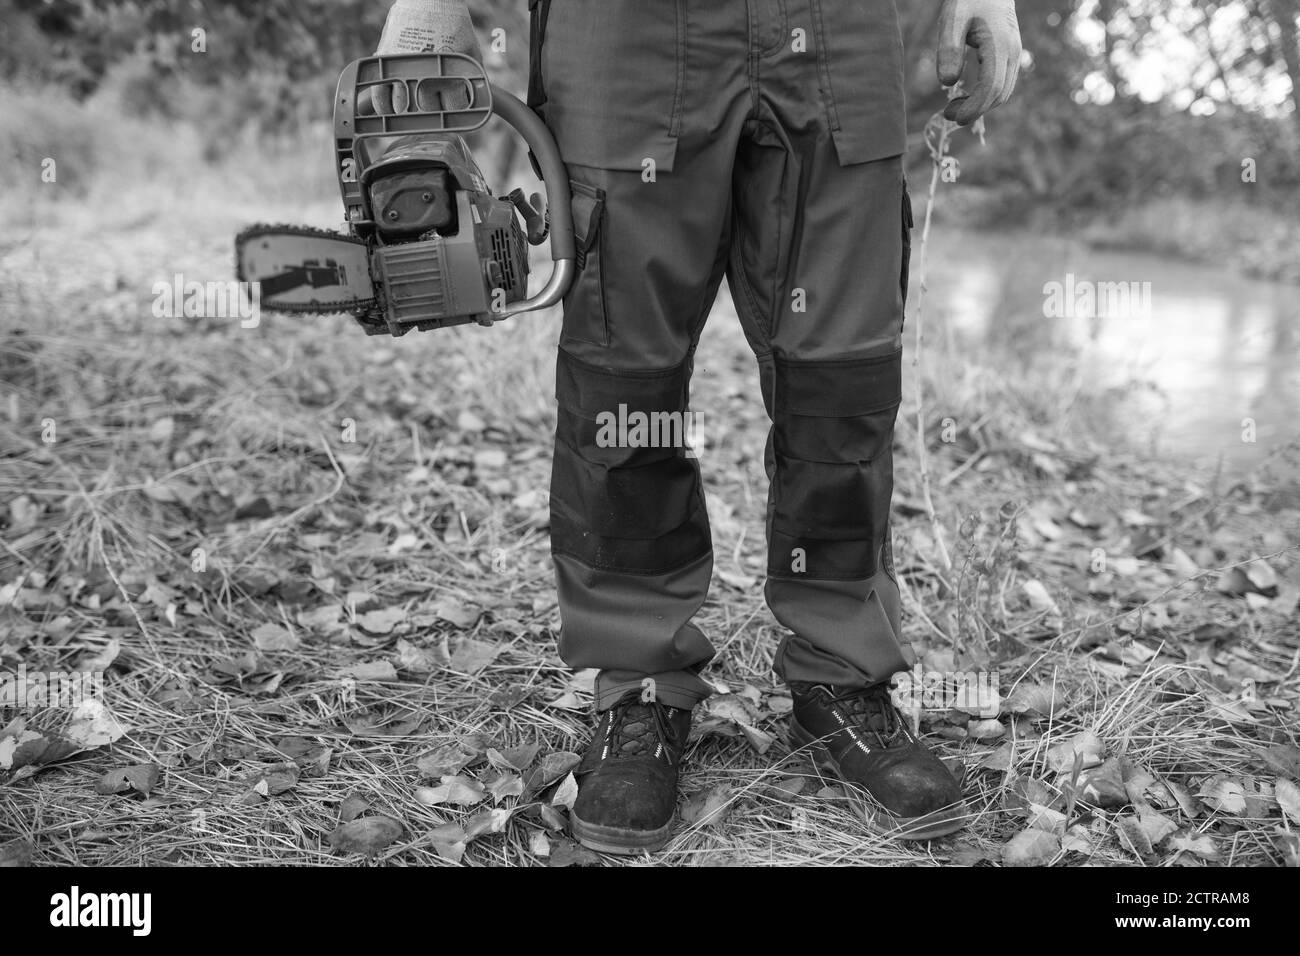 Grayscale shot of a lumberjack with a chainsaw in a forest Stock Photo